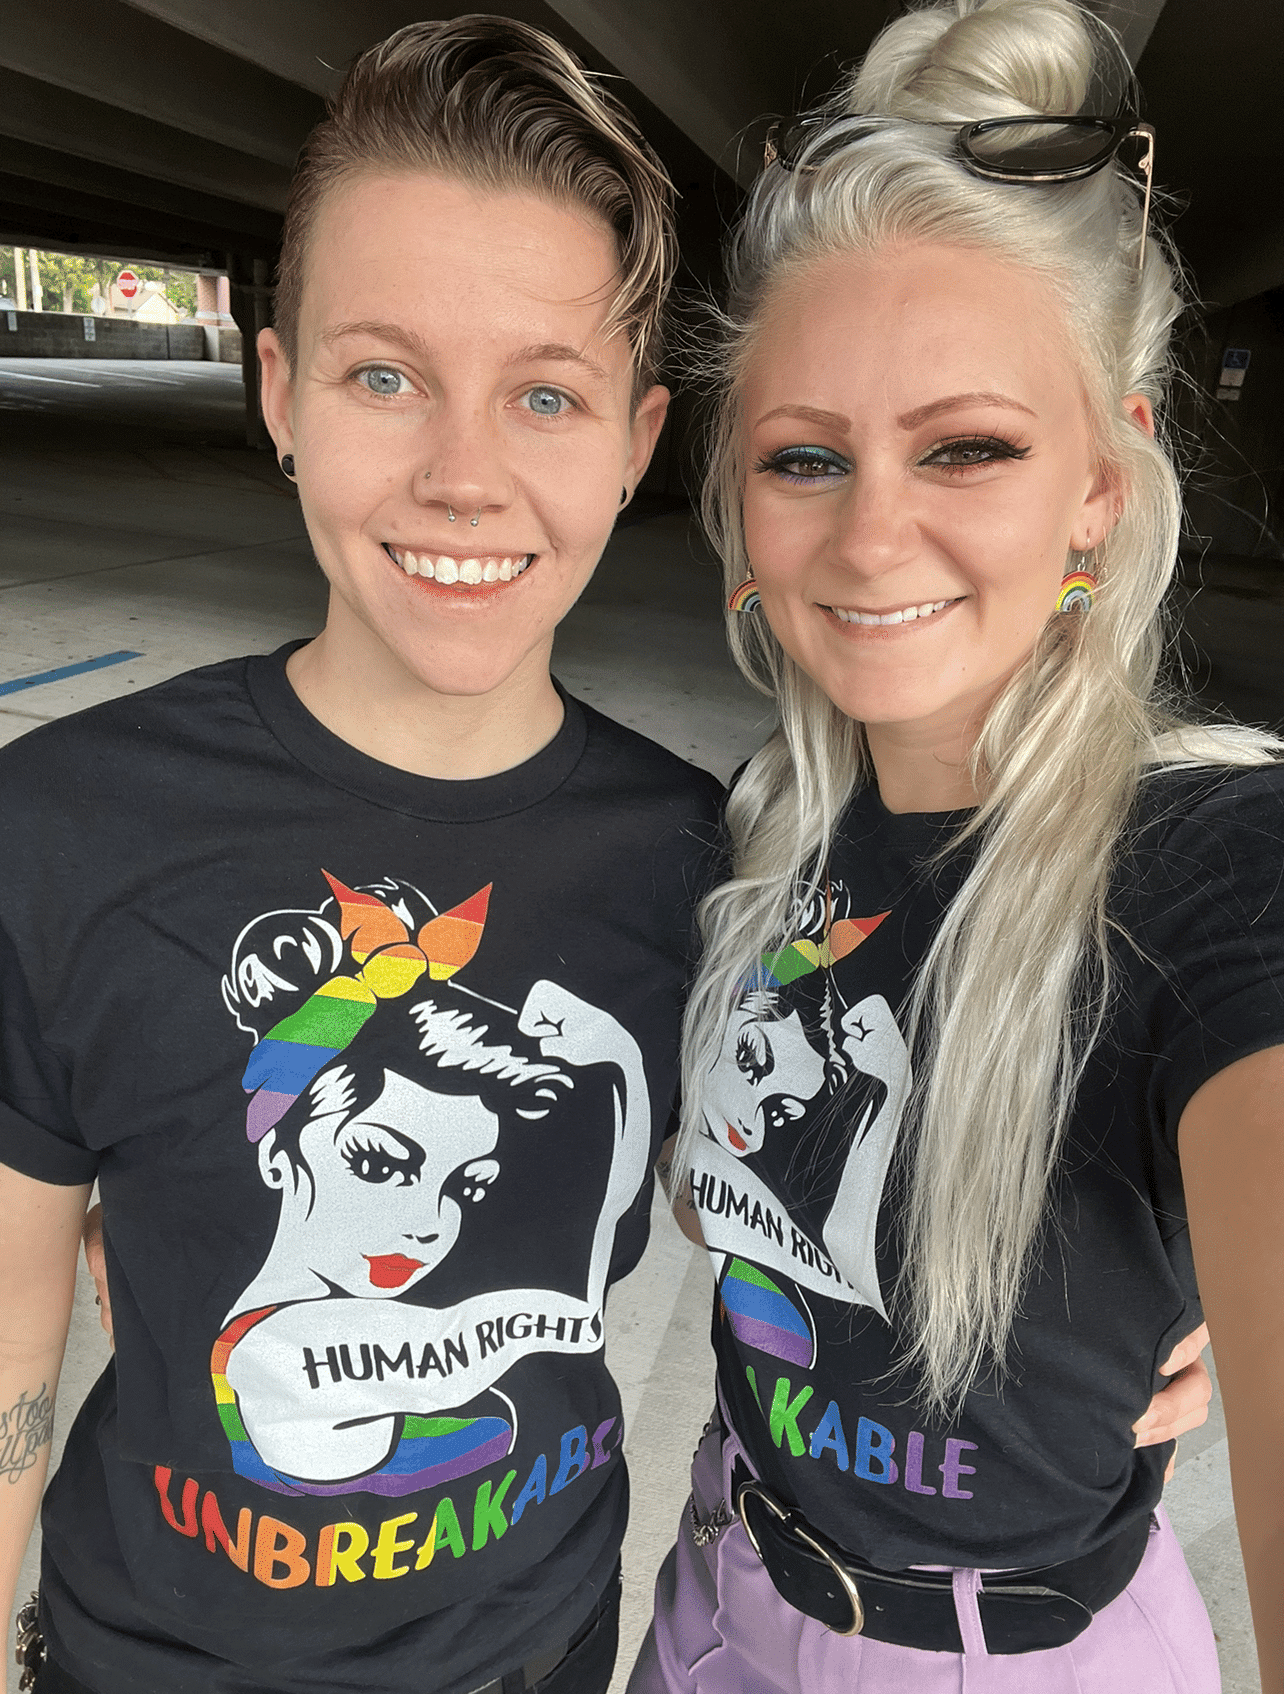 couple wears matching black tshirts with design on them smiling in parking garage